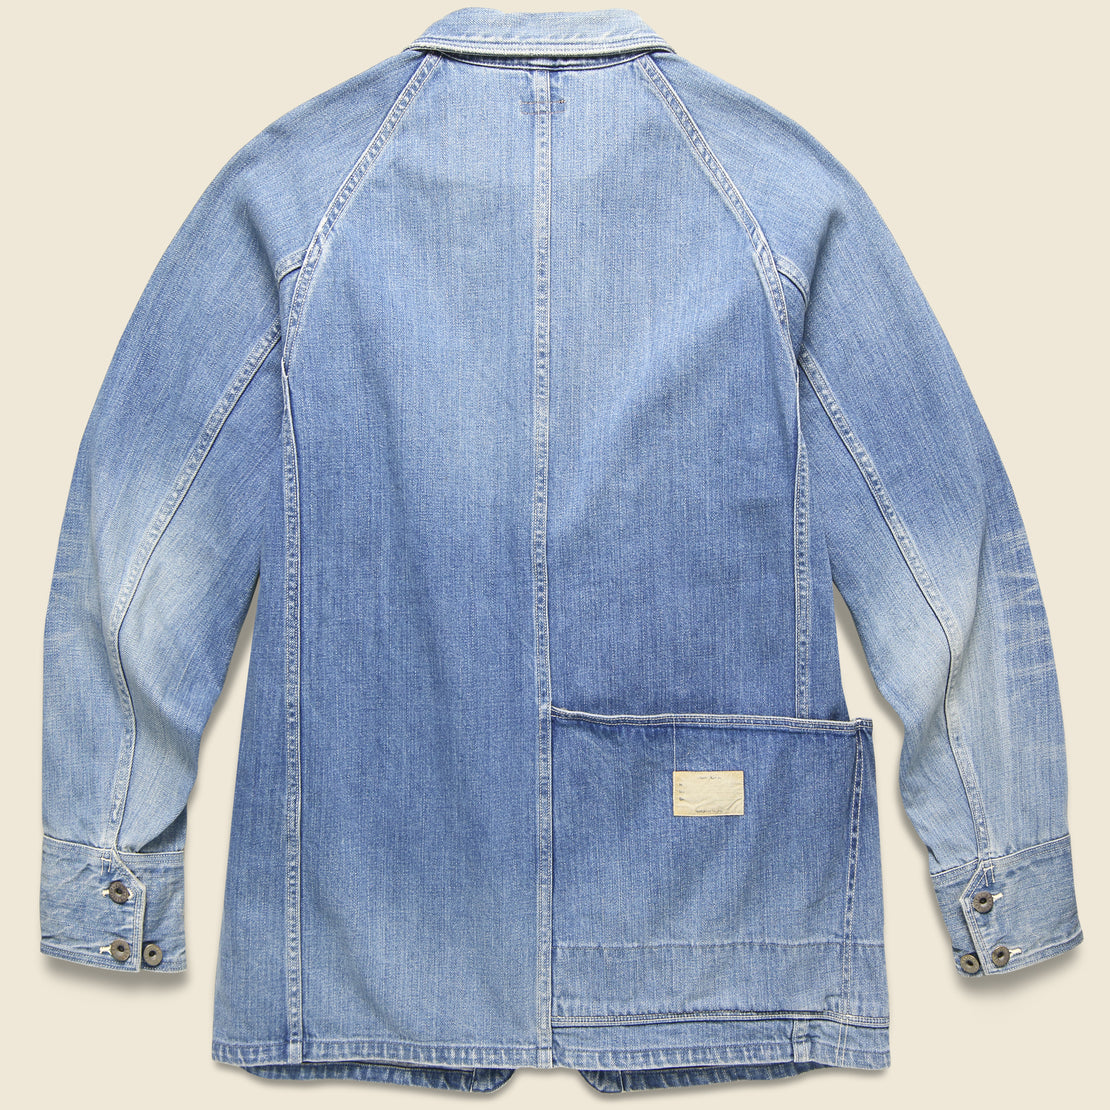 12oz Denim Cactus Coverall Jacket - Light Wash - Kapital - STAG Provisions - Outerwear - Coat / Jacket